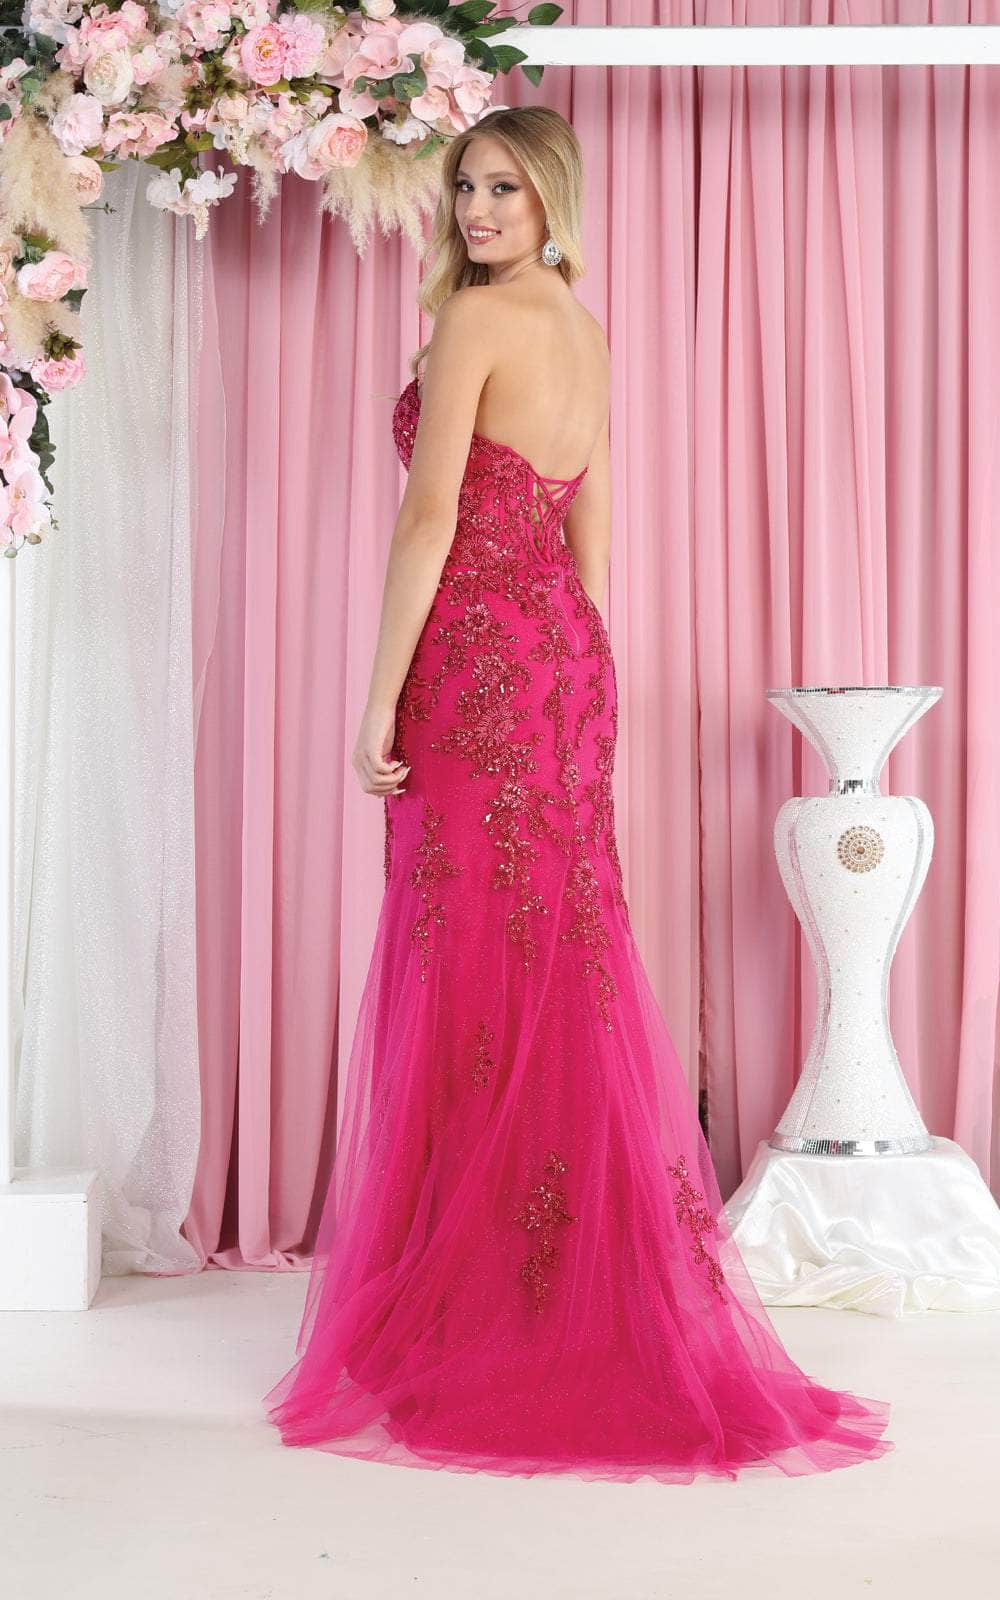 May Queen RQ8013 - Strapless Embellished Evening Dress Special Occasion Dress